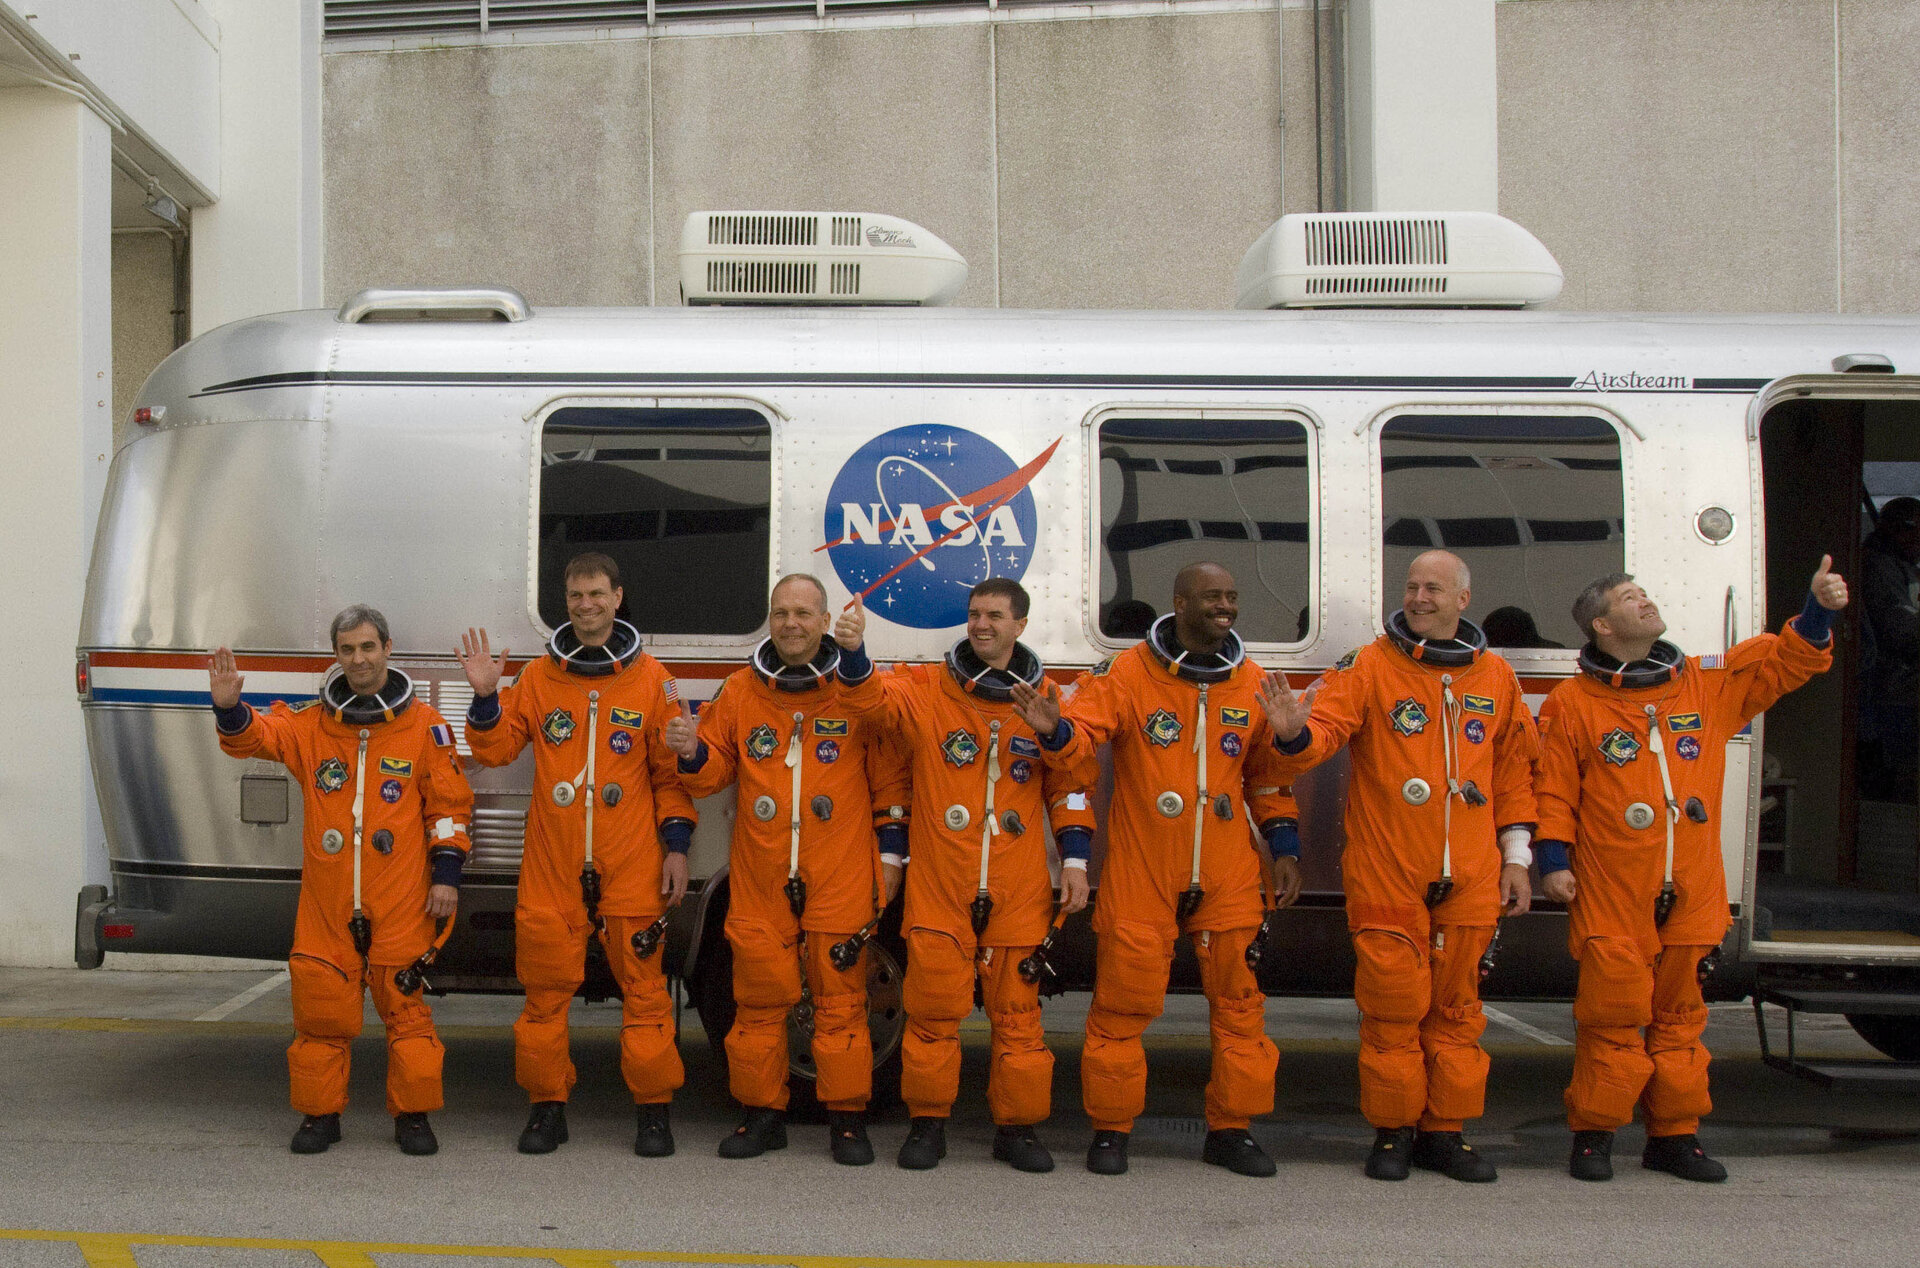 STS-122 mission crew during walk out